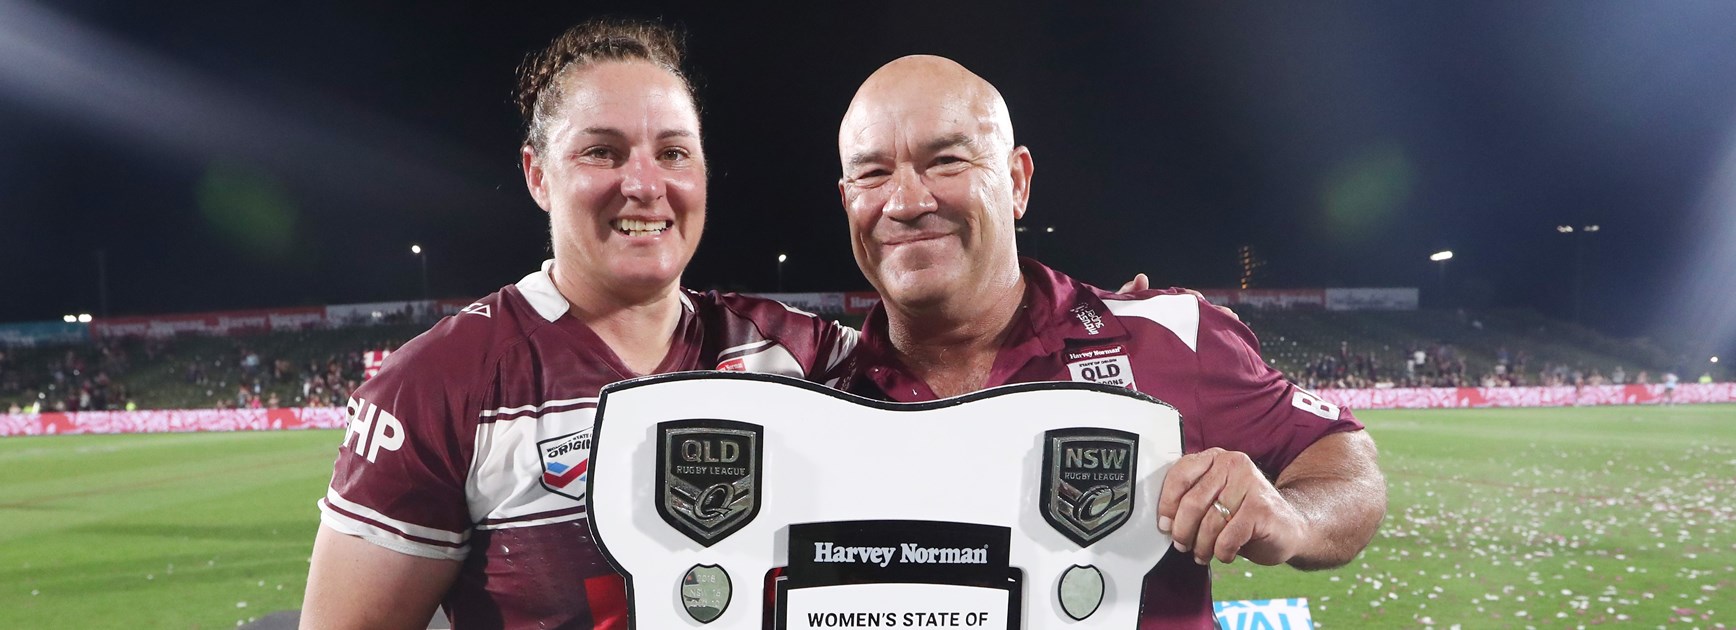 Hetherington 'disappointed' as Maroons look for new coach to fill expanded role